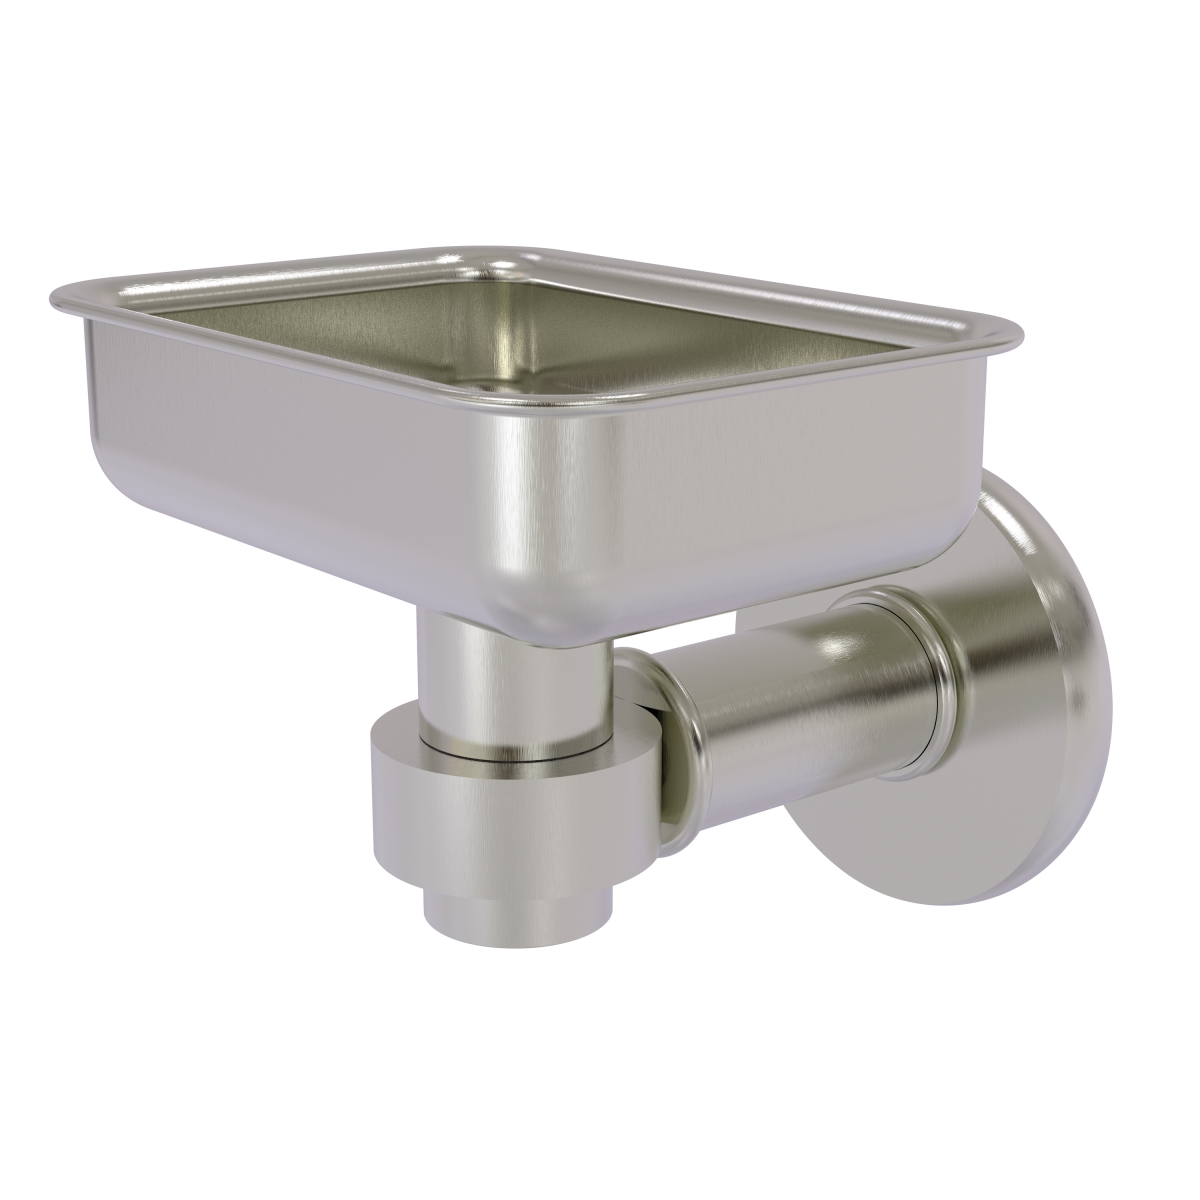 Picture of Allied Brass 2032-SN Continental Collection Wall Mounted Soap Dish Holder, Satin Nickel